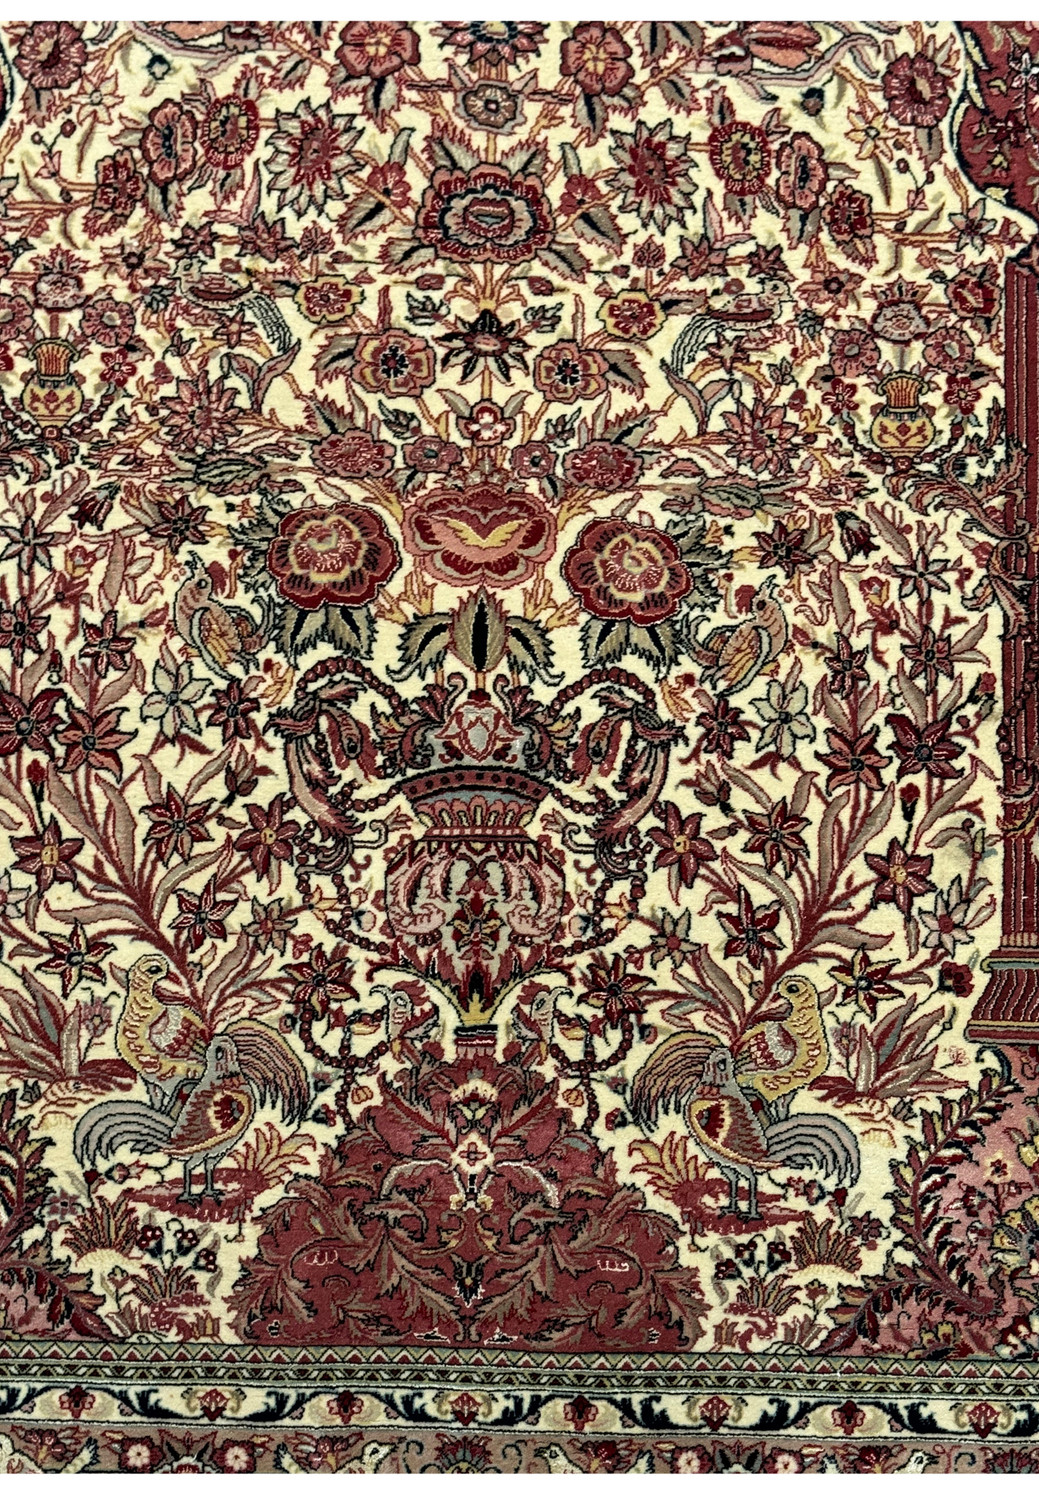 Close-up of the central design of the Persian Qum rug, focusing on the detailed floral medallion and the vibrant contrast of reds and creams with silk highlights.